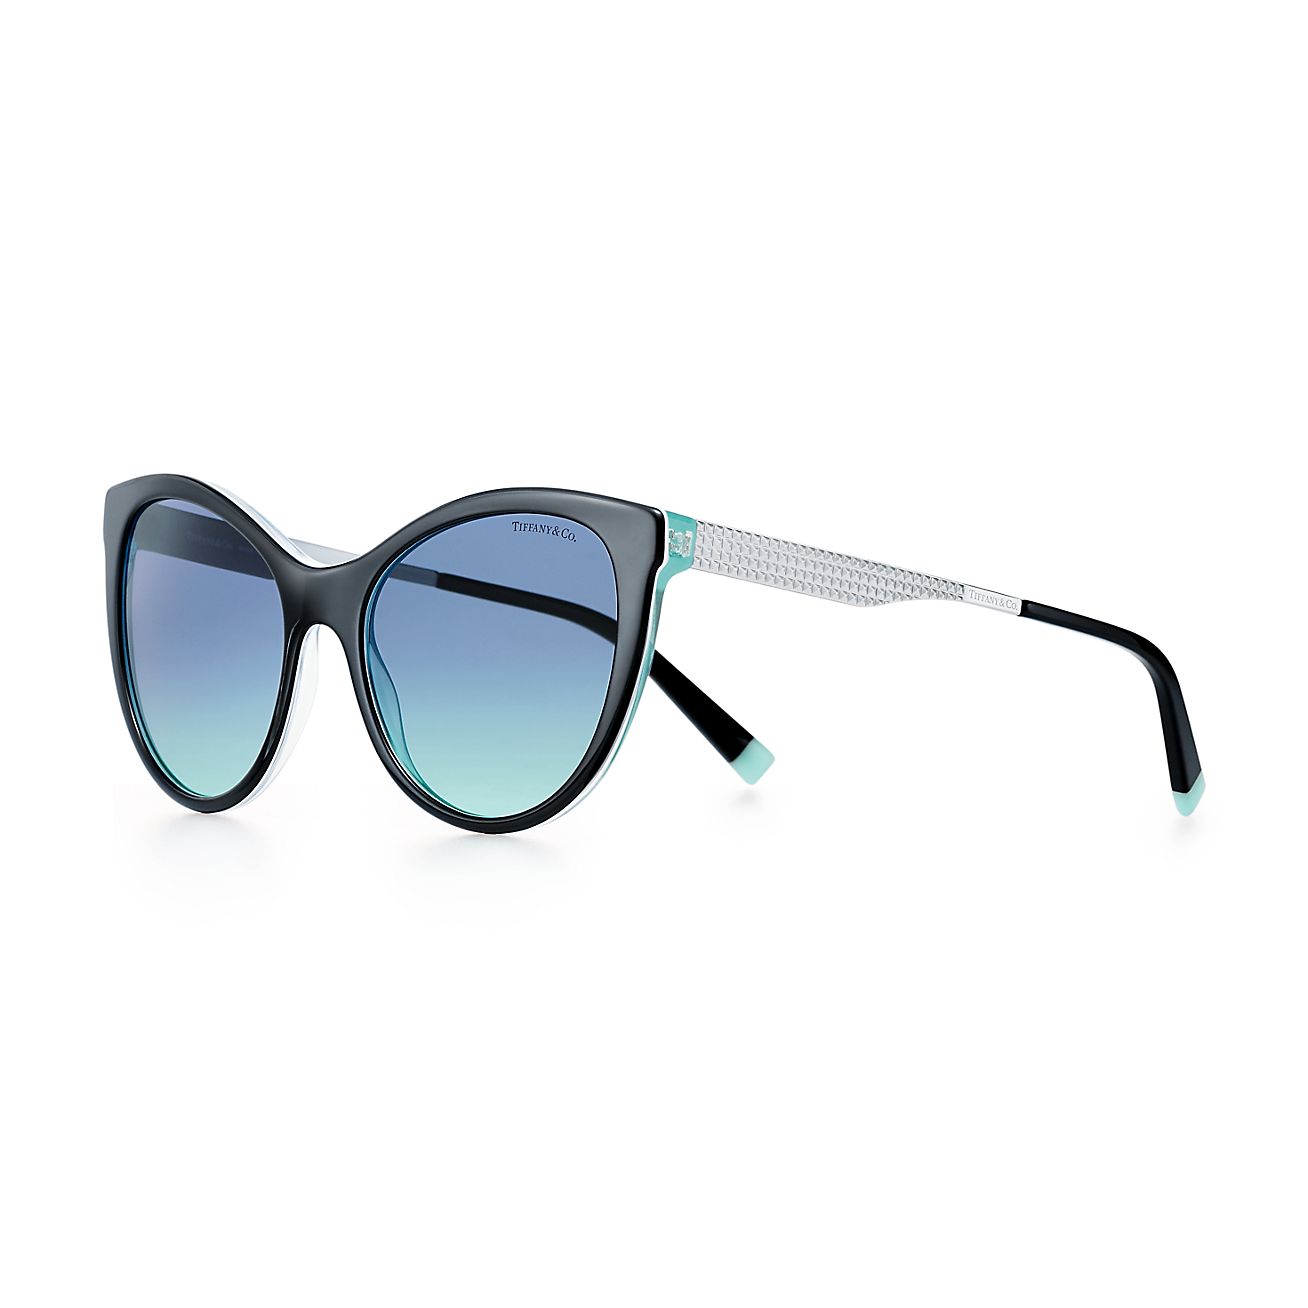 Diamond Point butterfly sunglasses in 